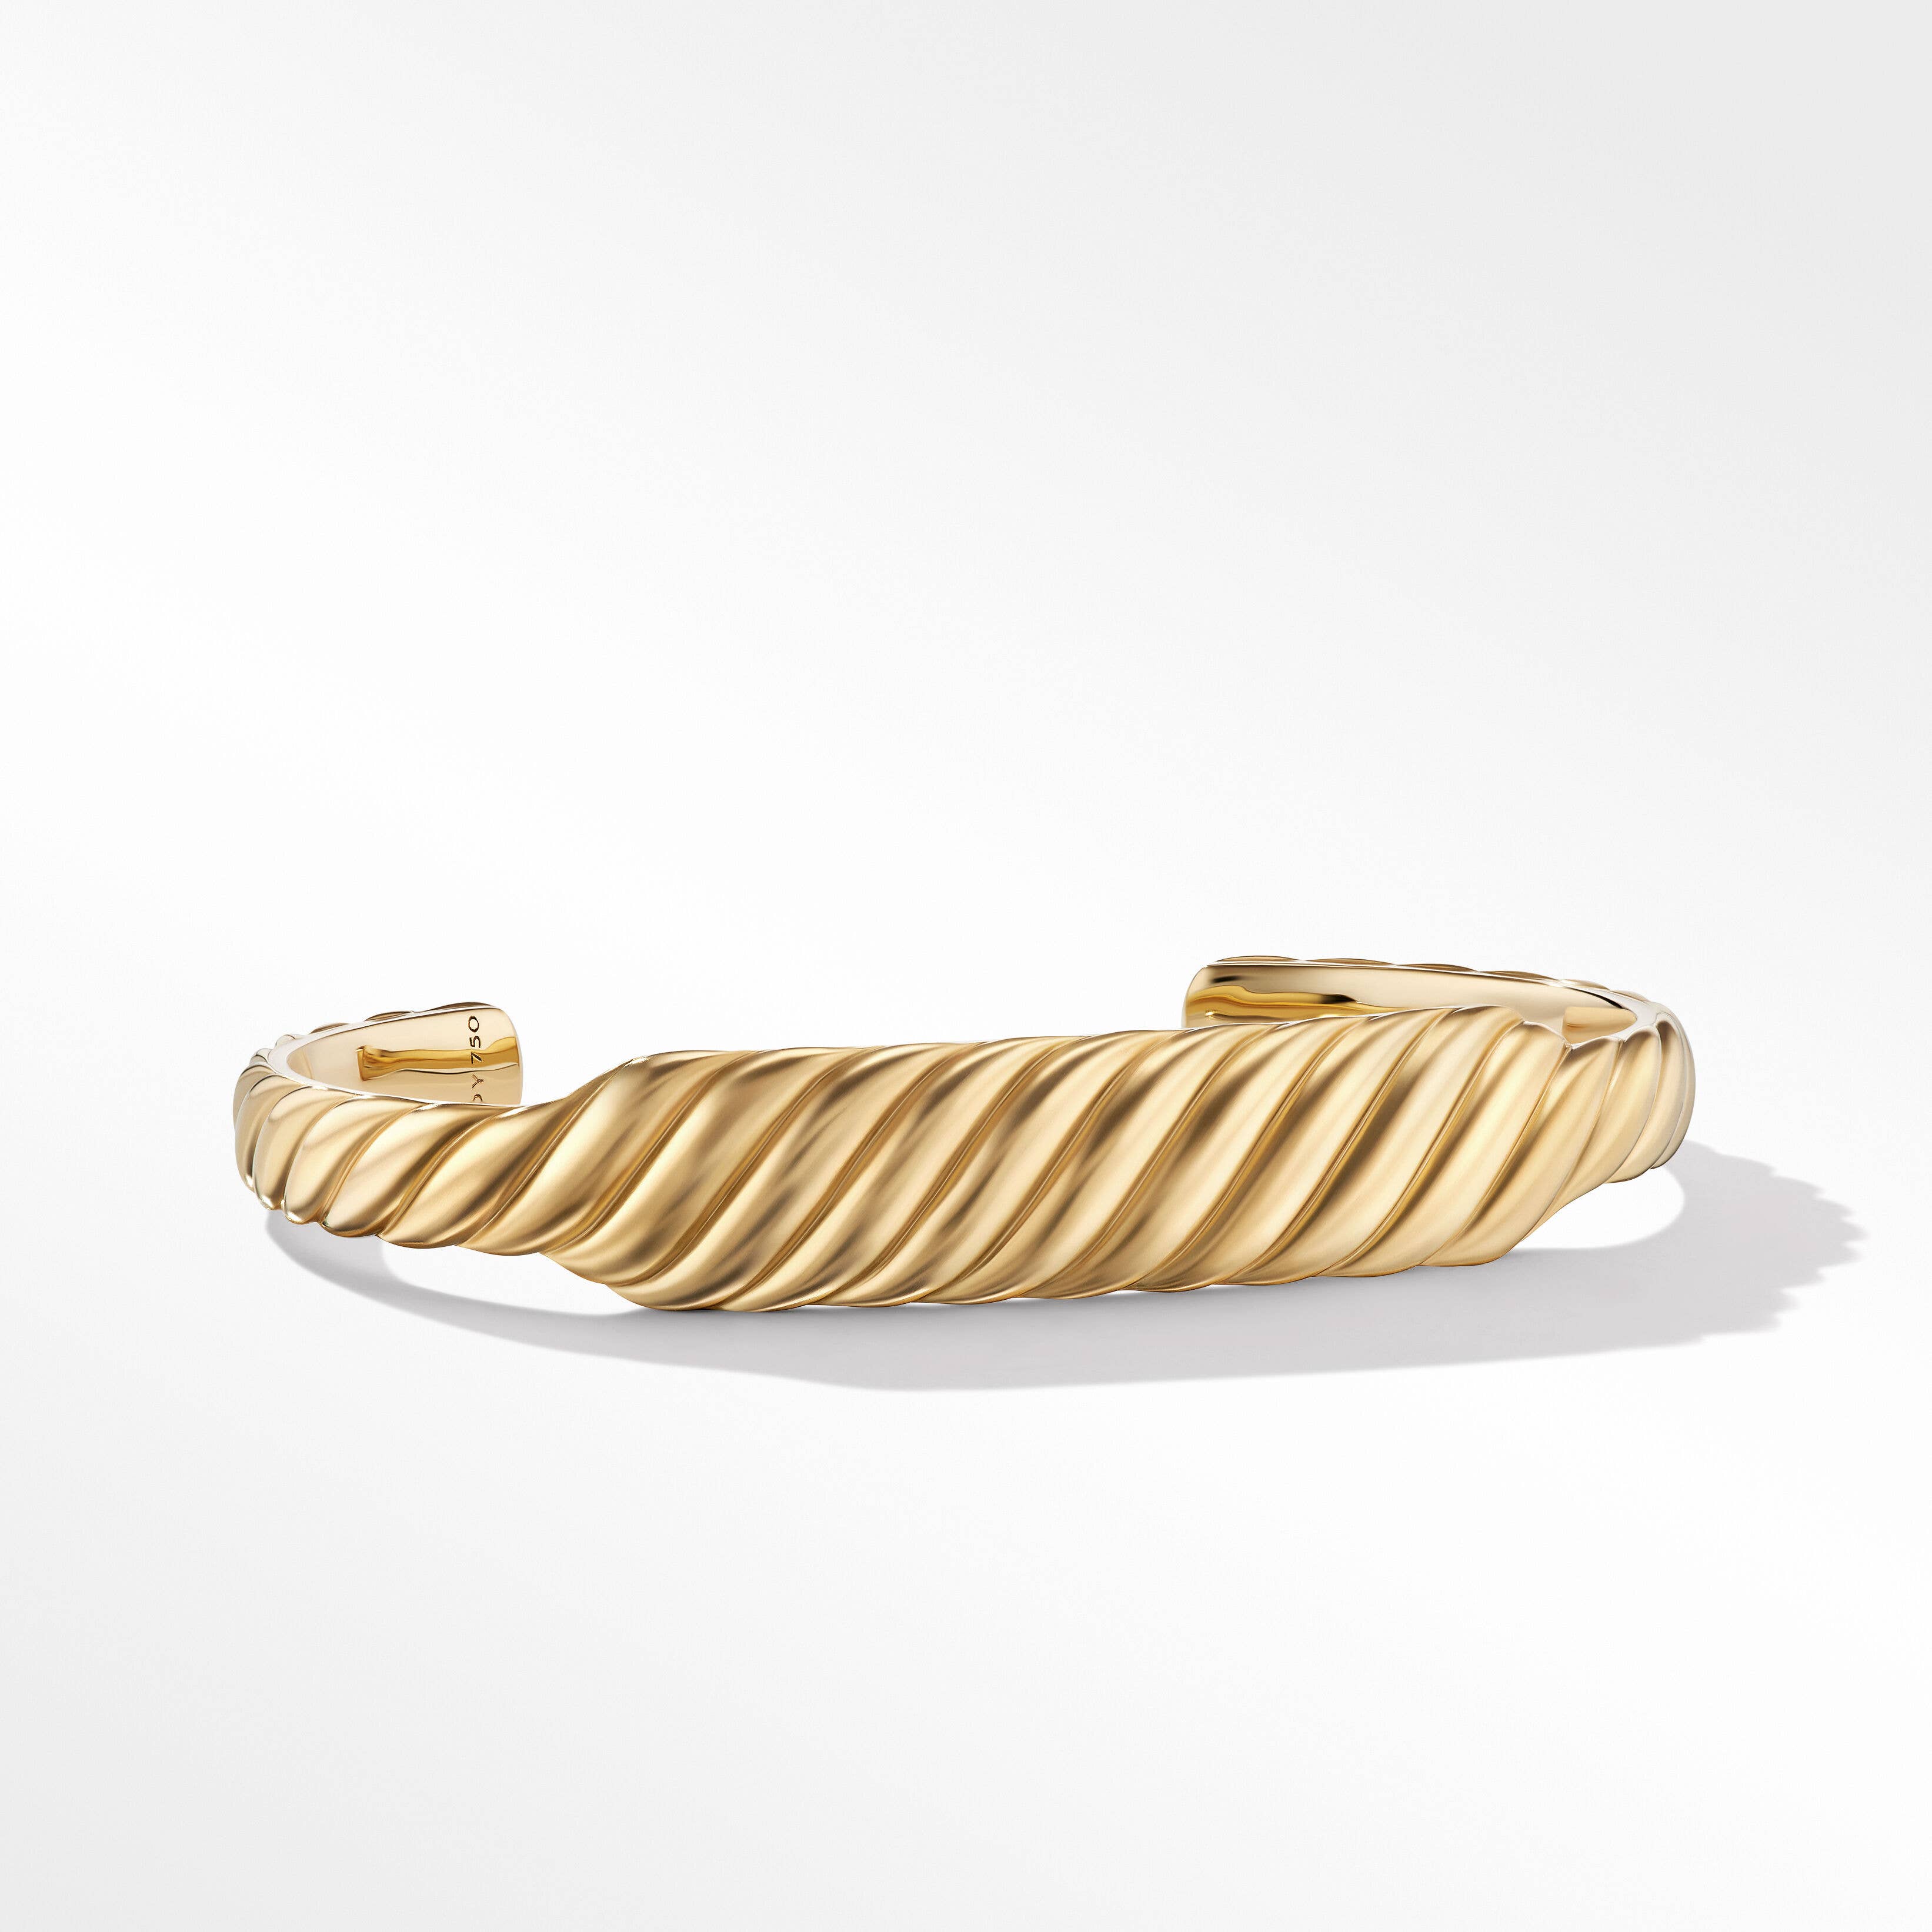 Sculpted Cable Contour Bracelet in 18K Yellow Gold